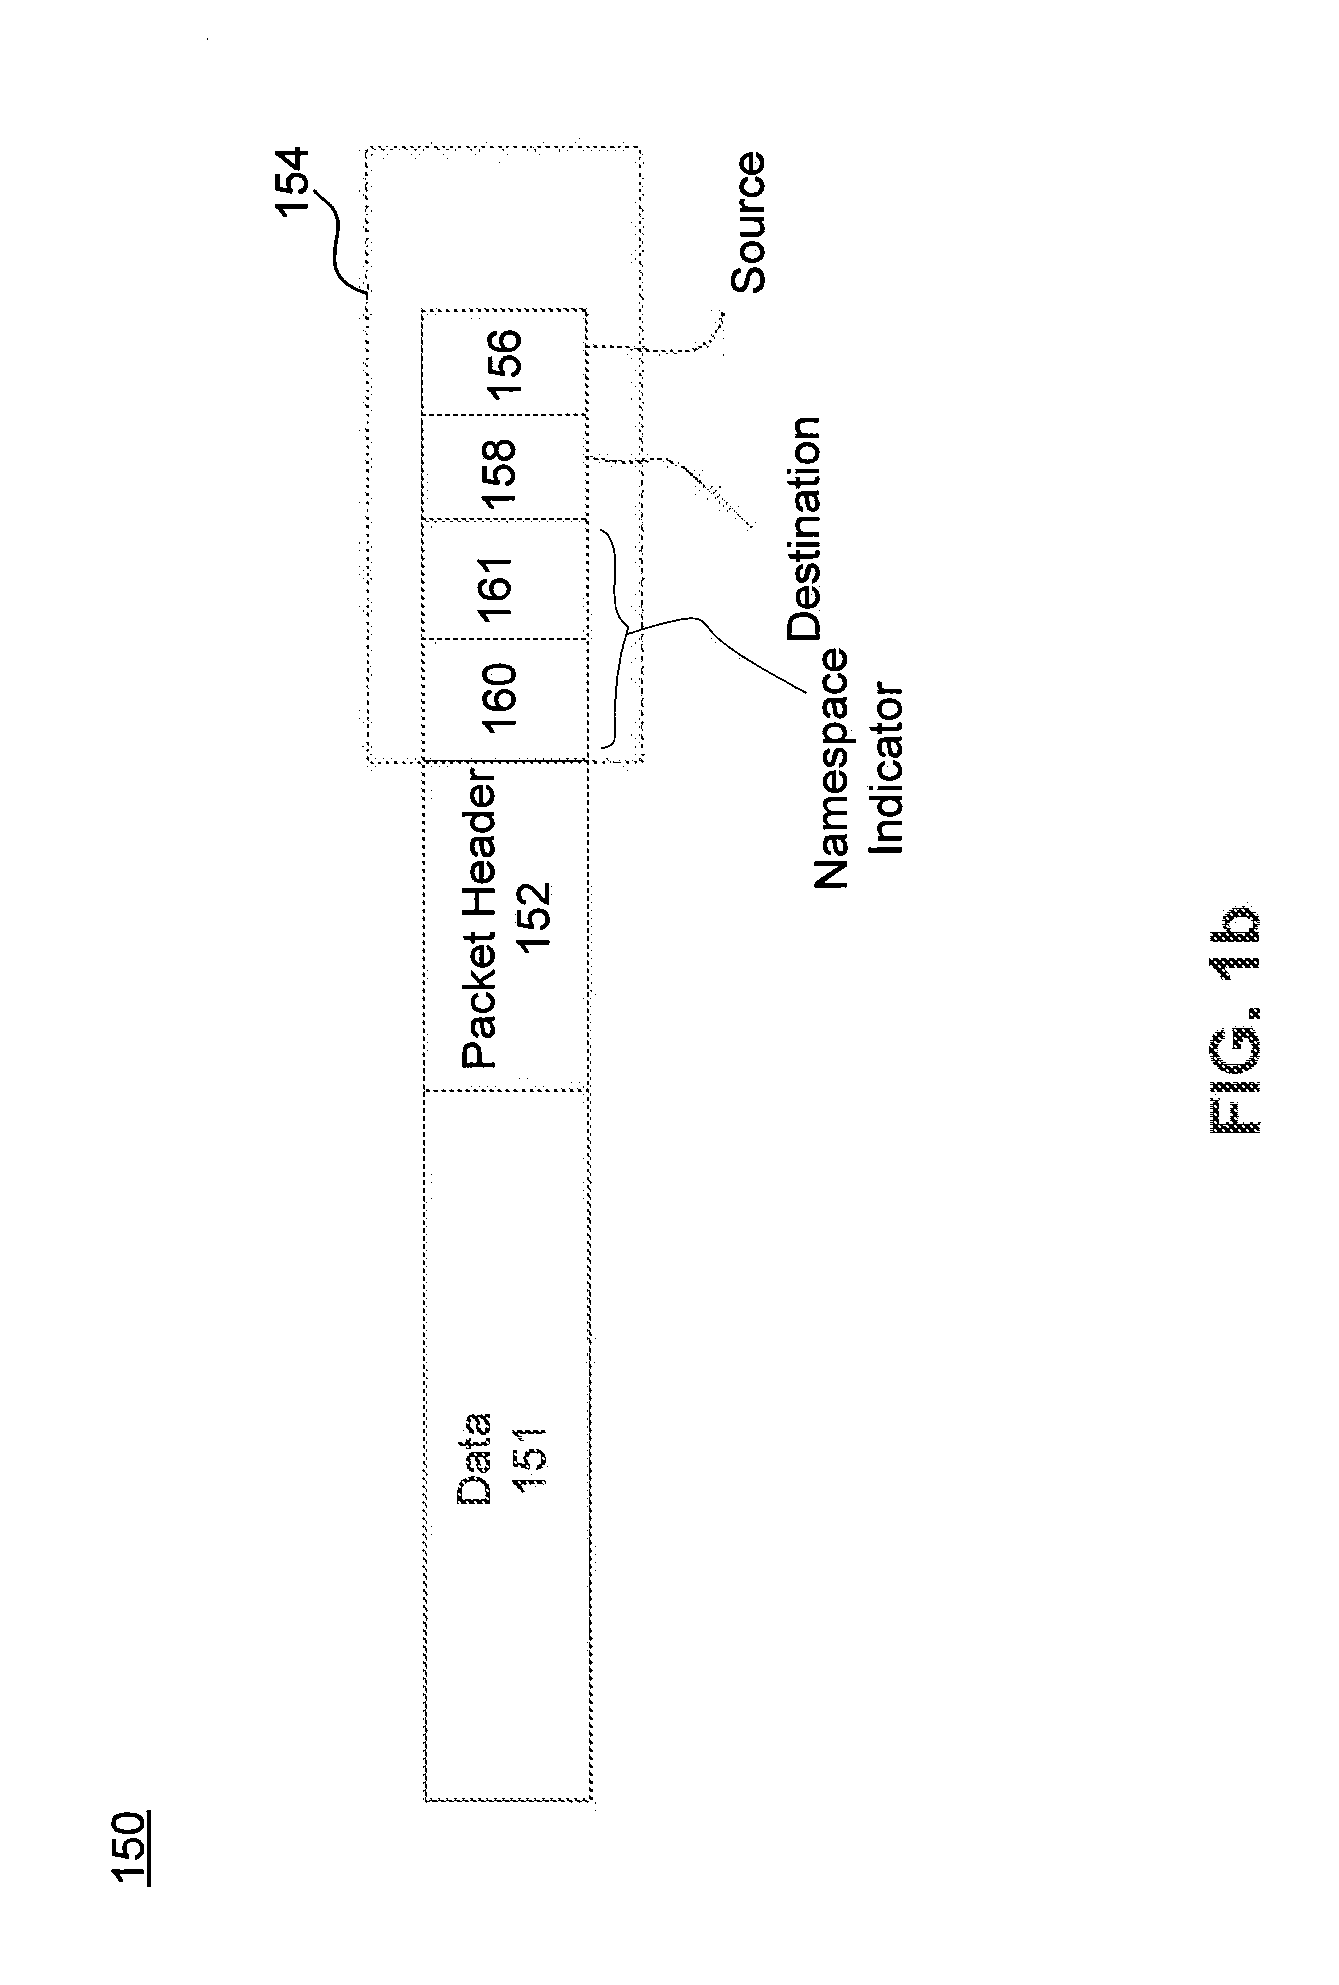 Method and System of Frame Forwarding with Link Aggregation in Distributed Ethernet Bridges